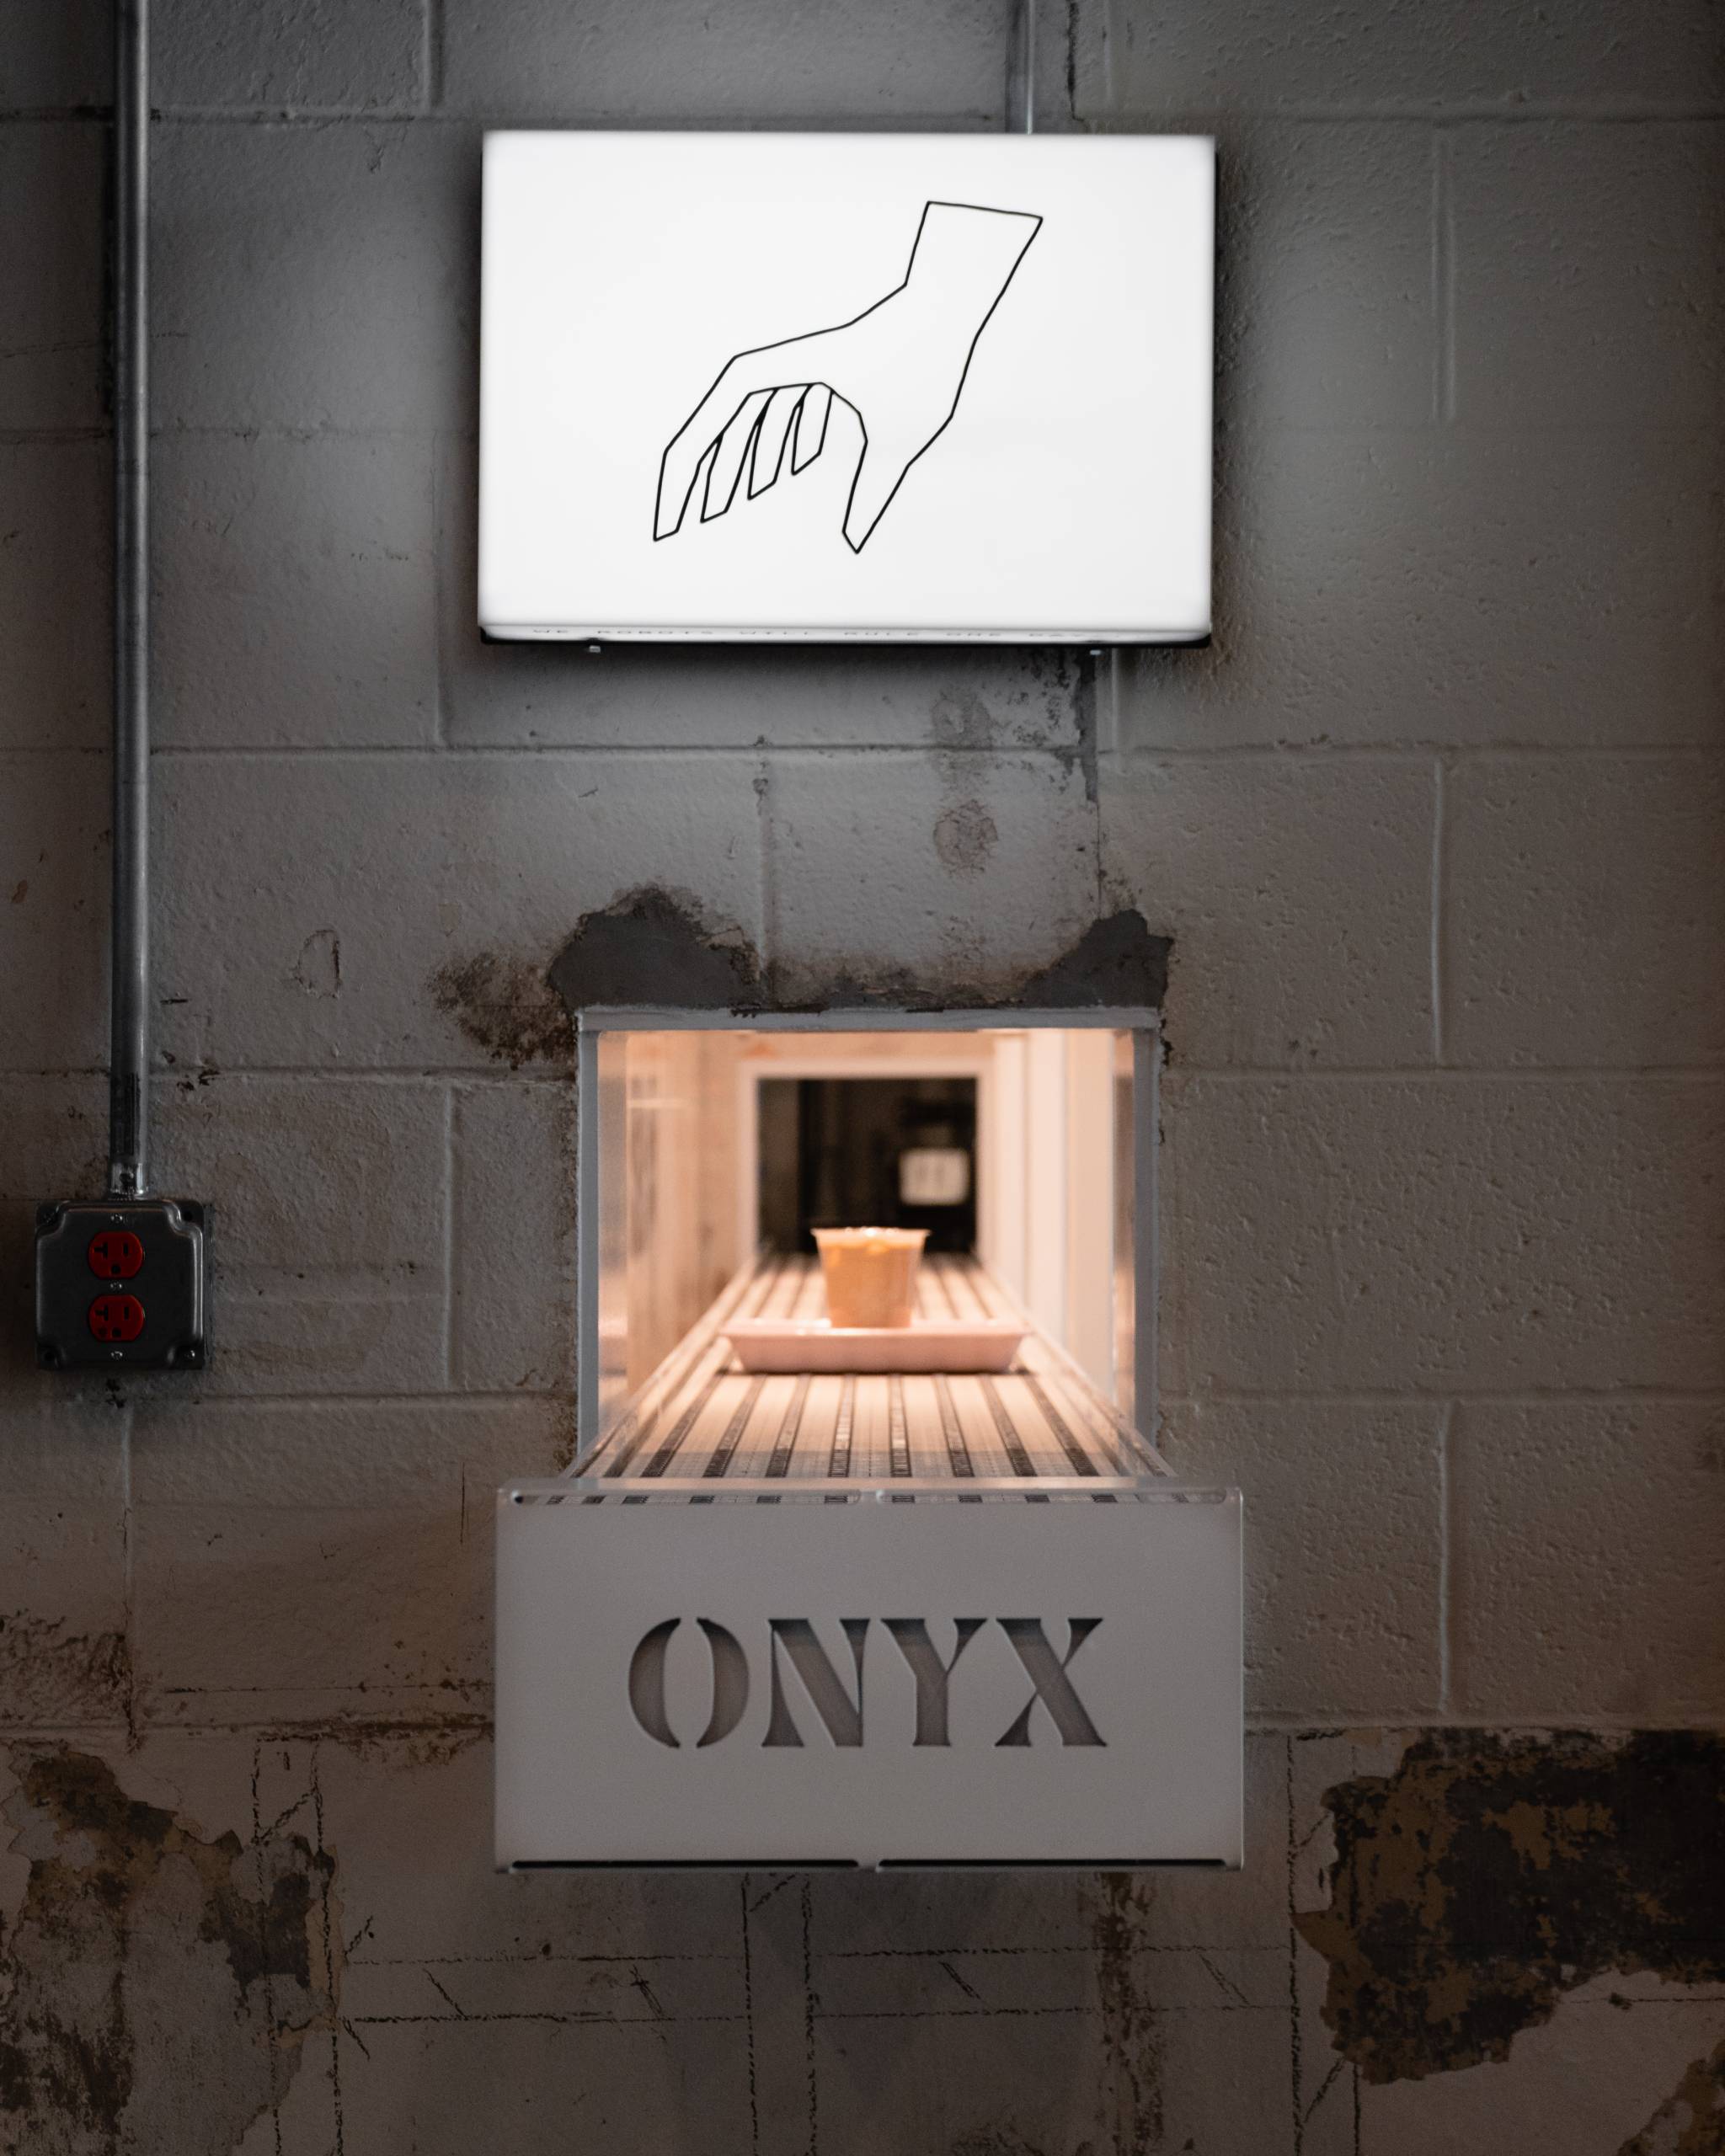 Onyx Coffee Lab plans chocolate-focused concept in downtown